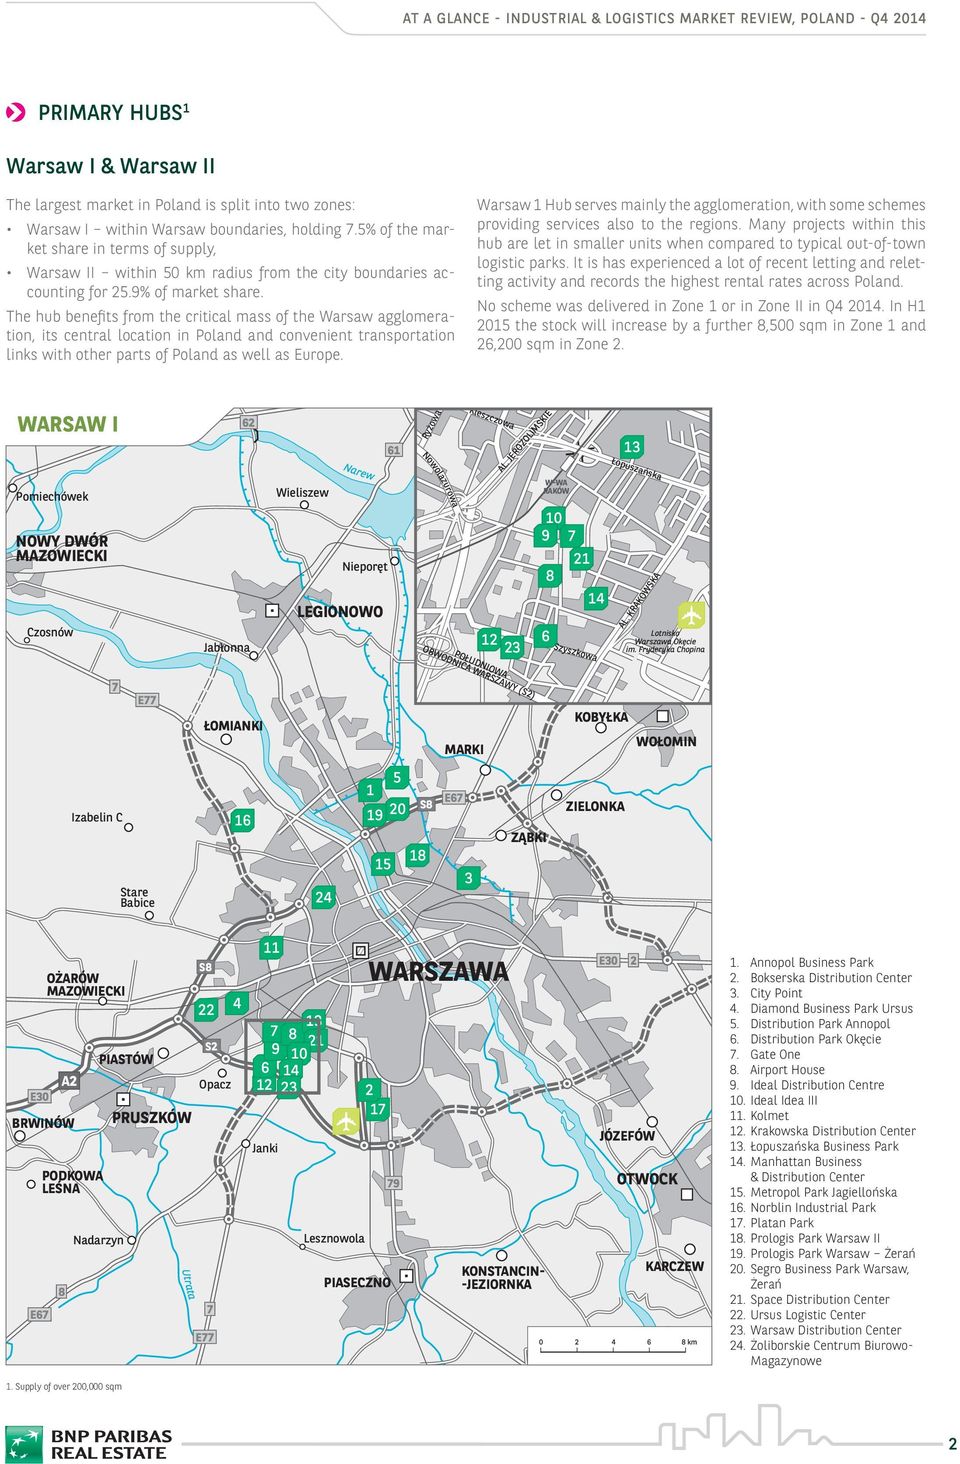 The hub benefits from the critical mass of the Warsaw agglomeration, its central location in Poland and convenient transportation links with other parts of Poland as well as Europe.